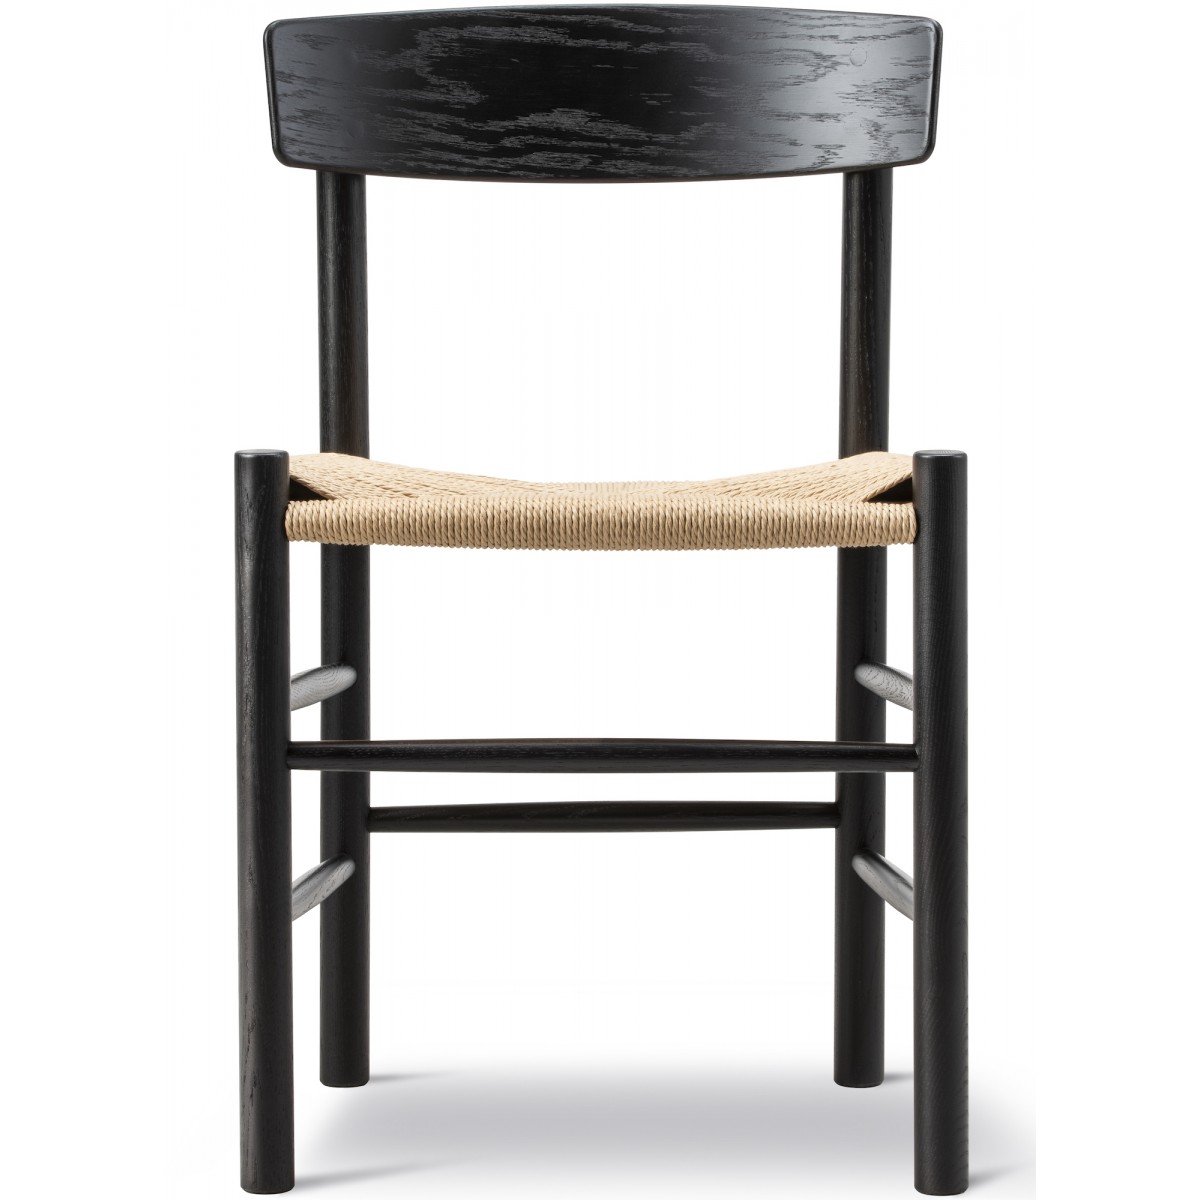 SOLD OUT J39 Chair – black lacquered oak + natural paper cord